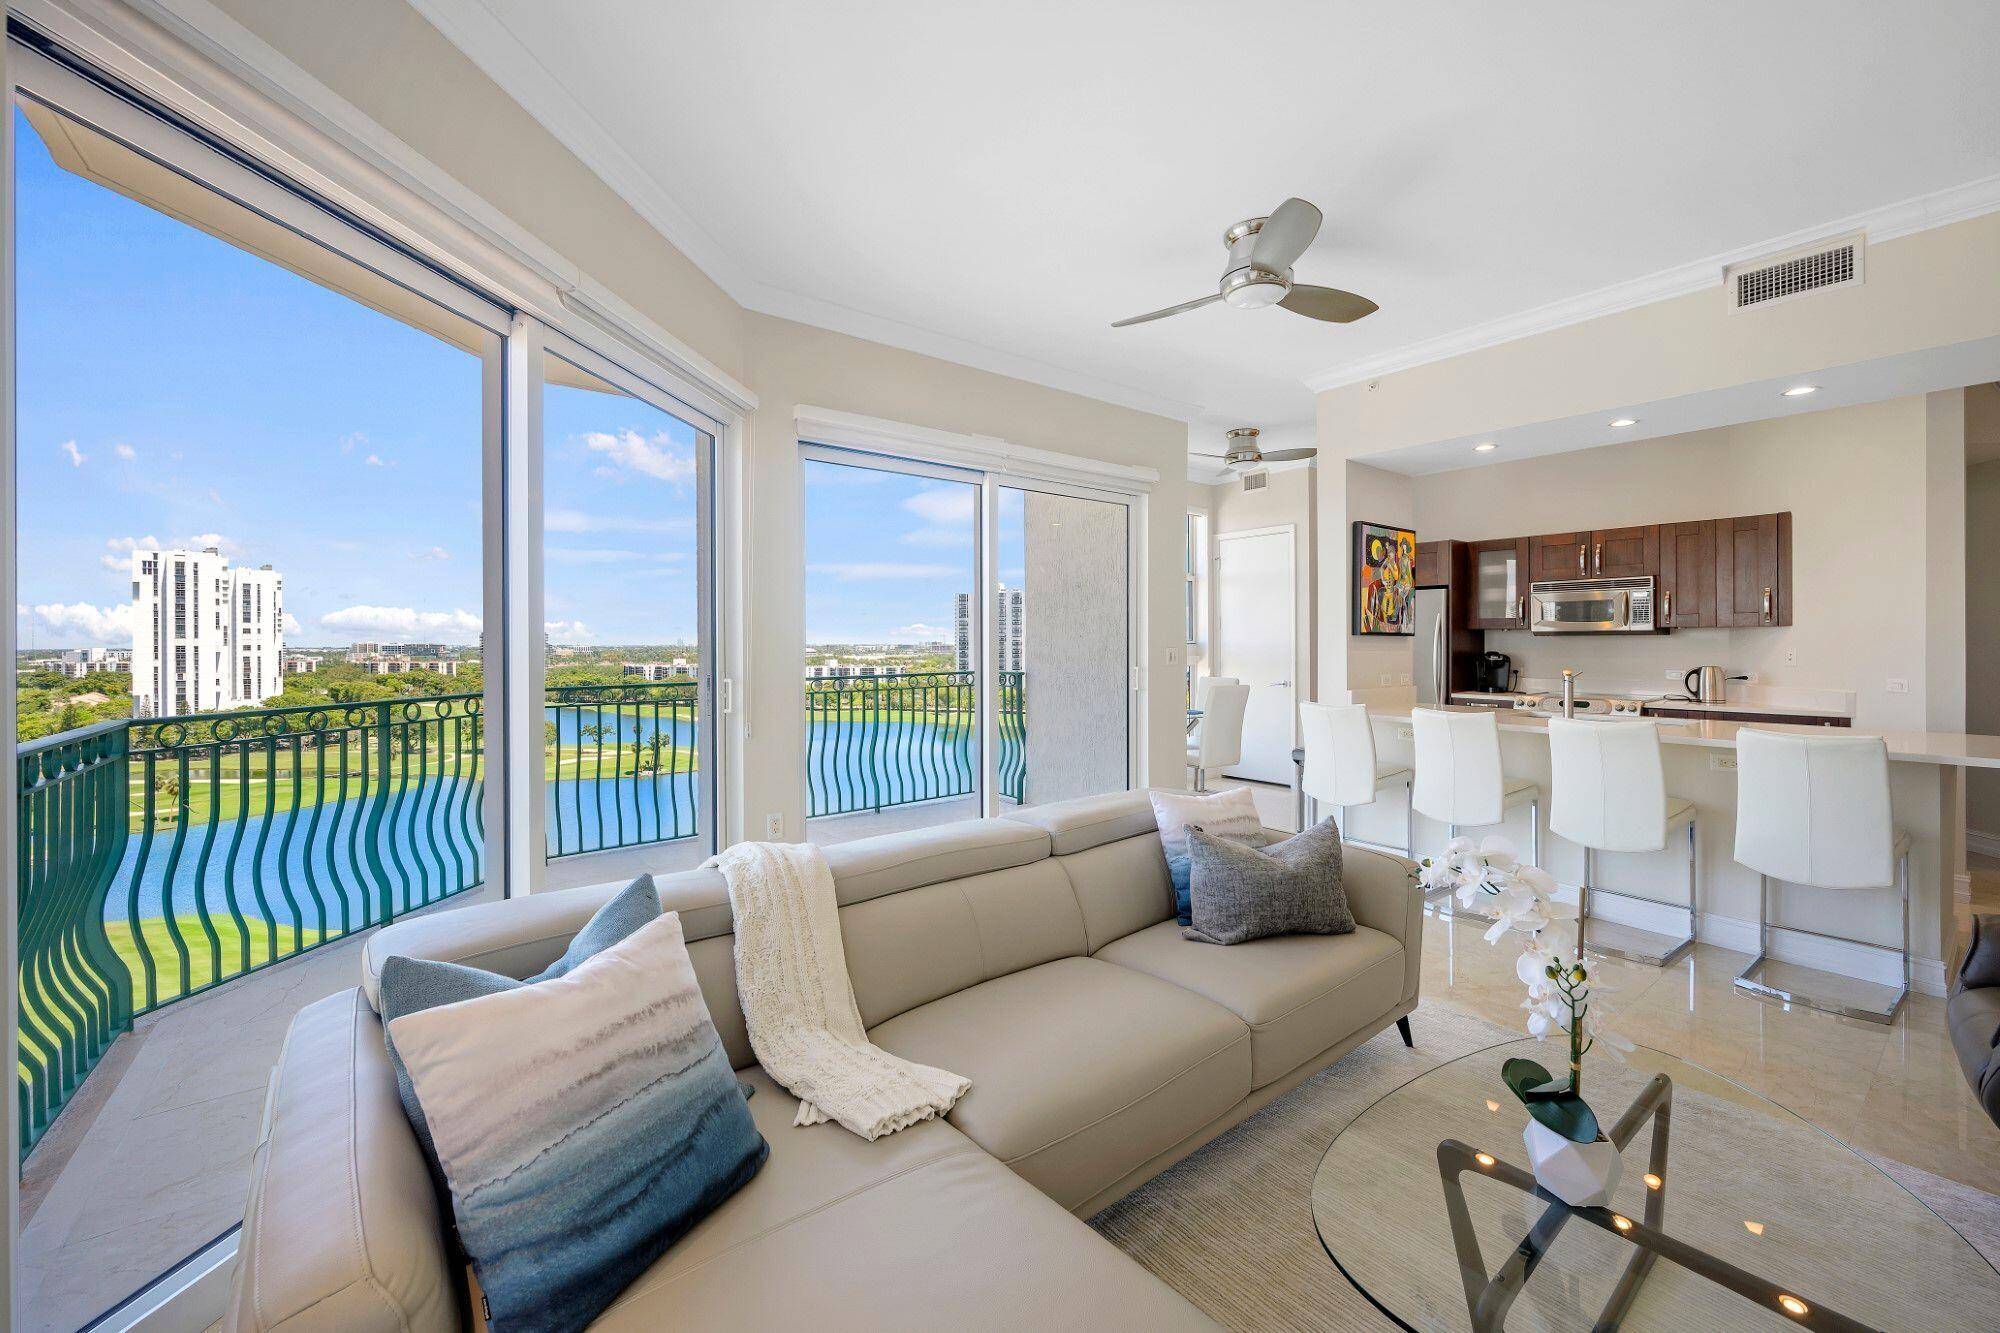 This Luxurious Penthouse located in the desirable Turnberry Village, offers the best Stunning views of the lake and and golf course.